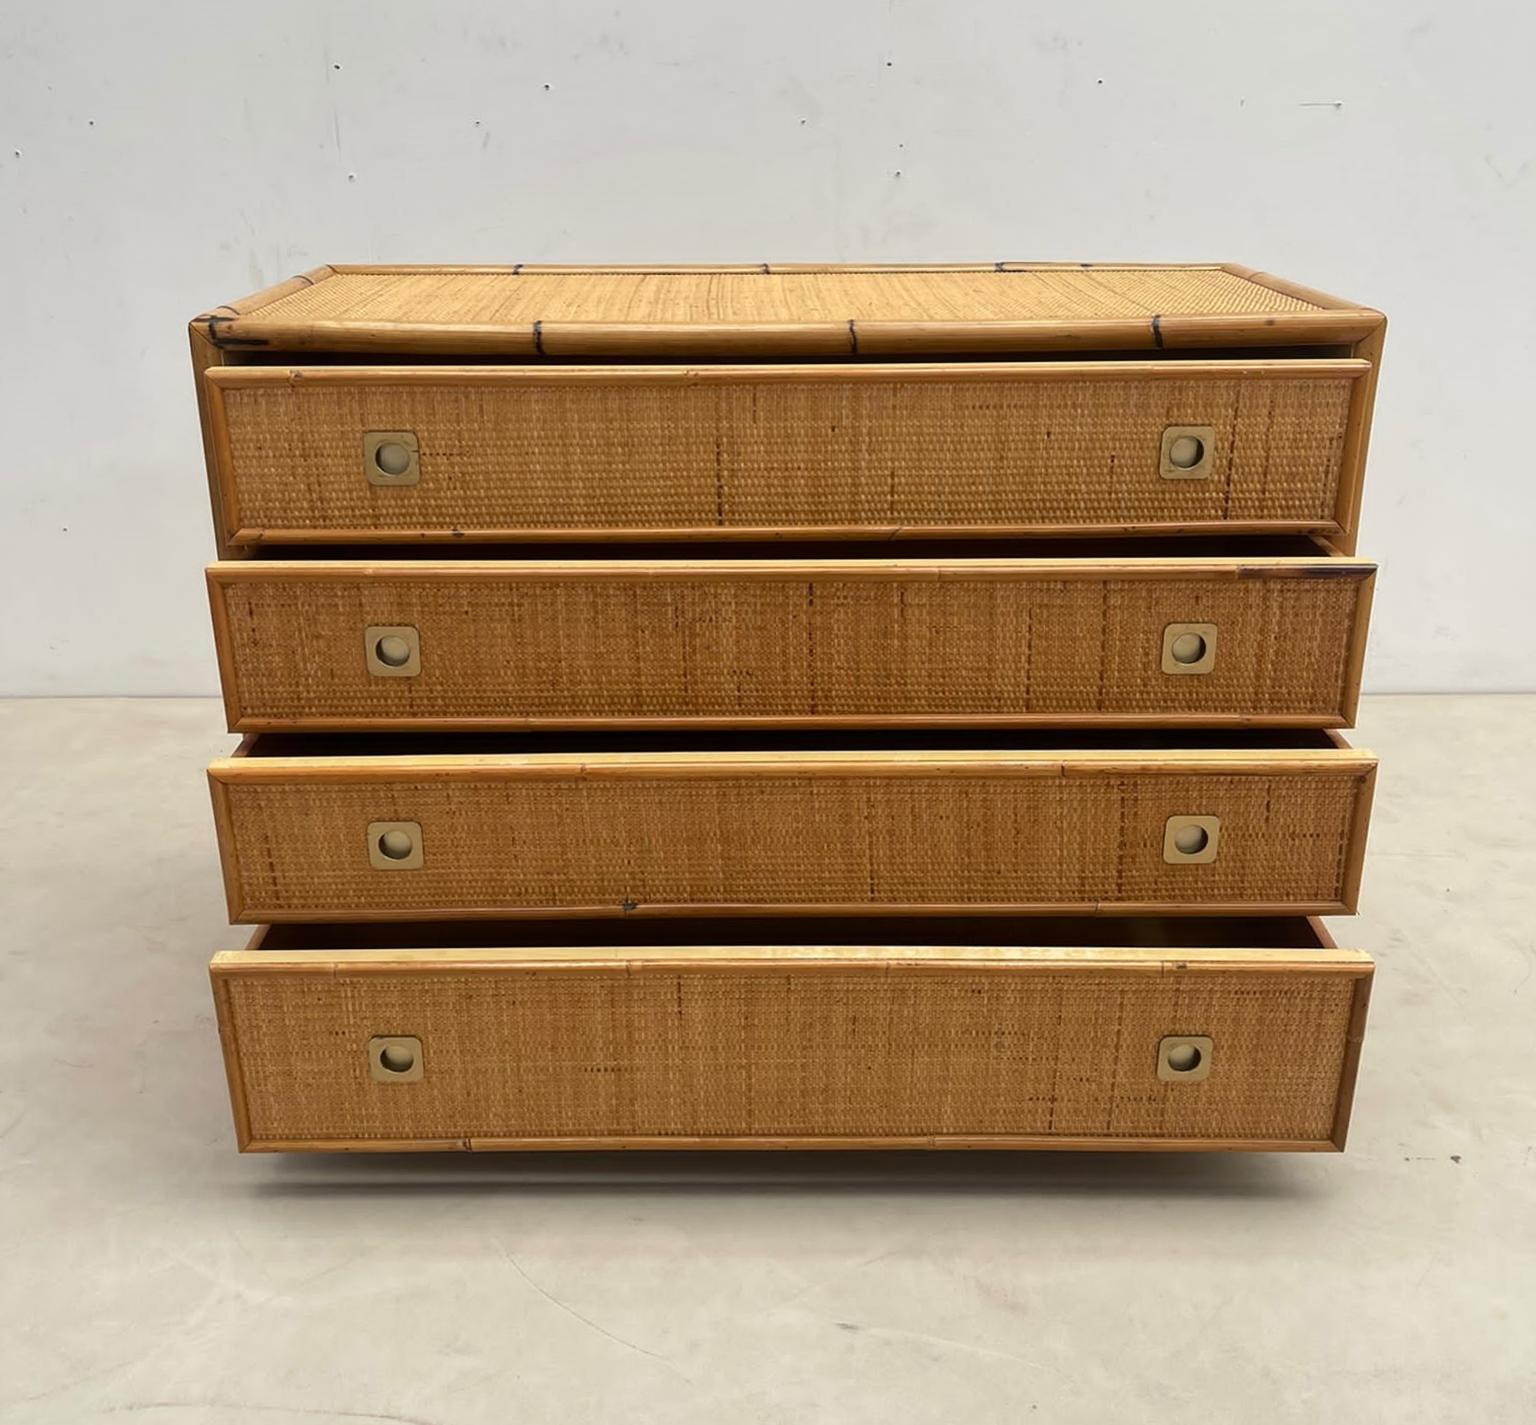 Dal Vera Bamboo and Wicker/Rattan Chest of Drawers, Italy 1960s For Sale 2